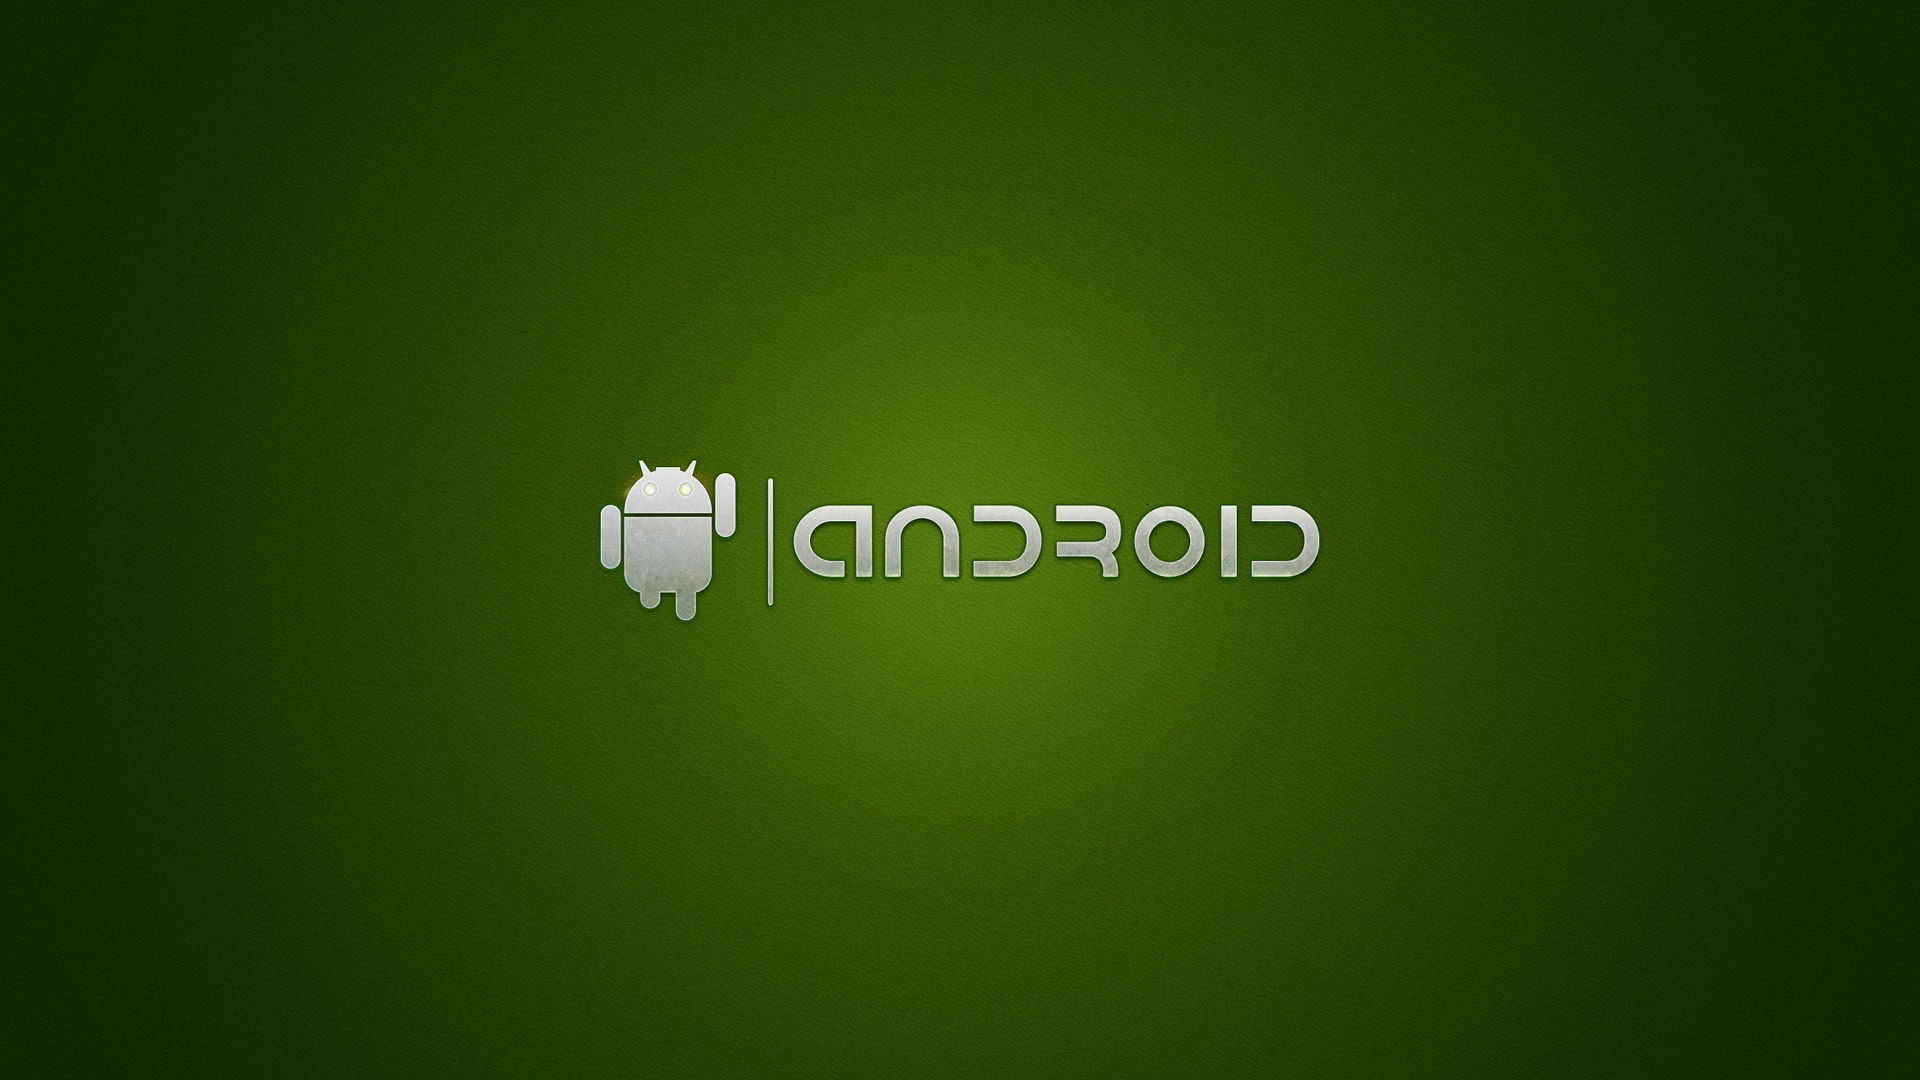  High Quality Android Wallpapers   Desktop Wallpapers Blogs PC